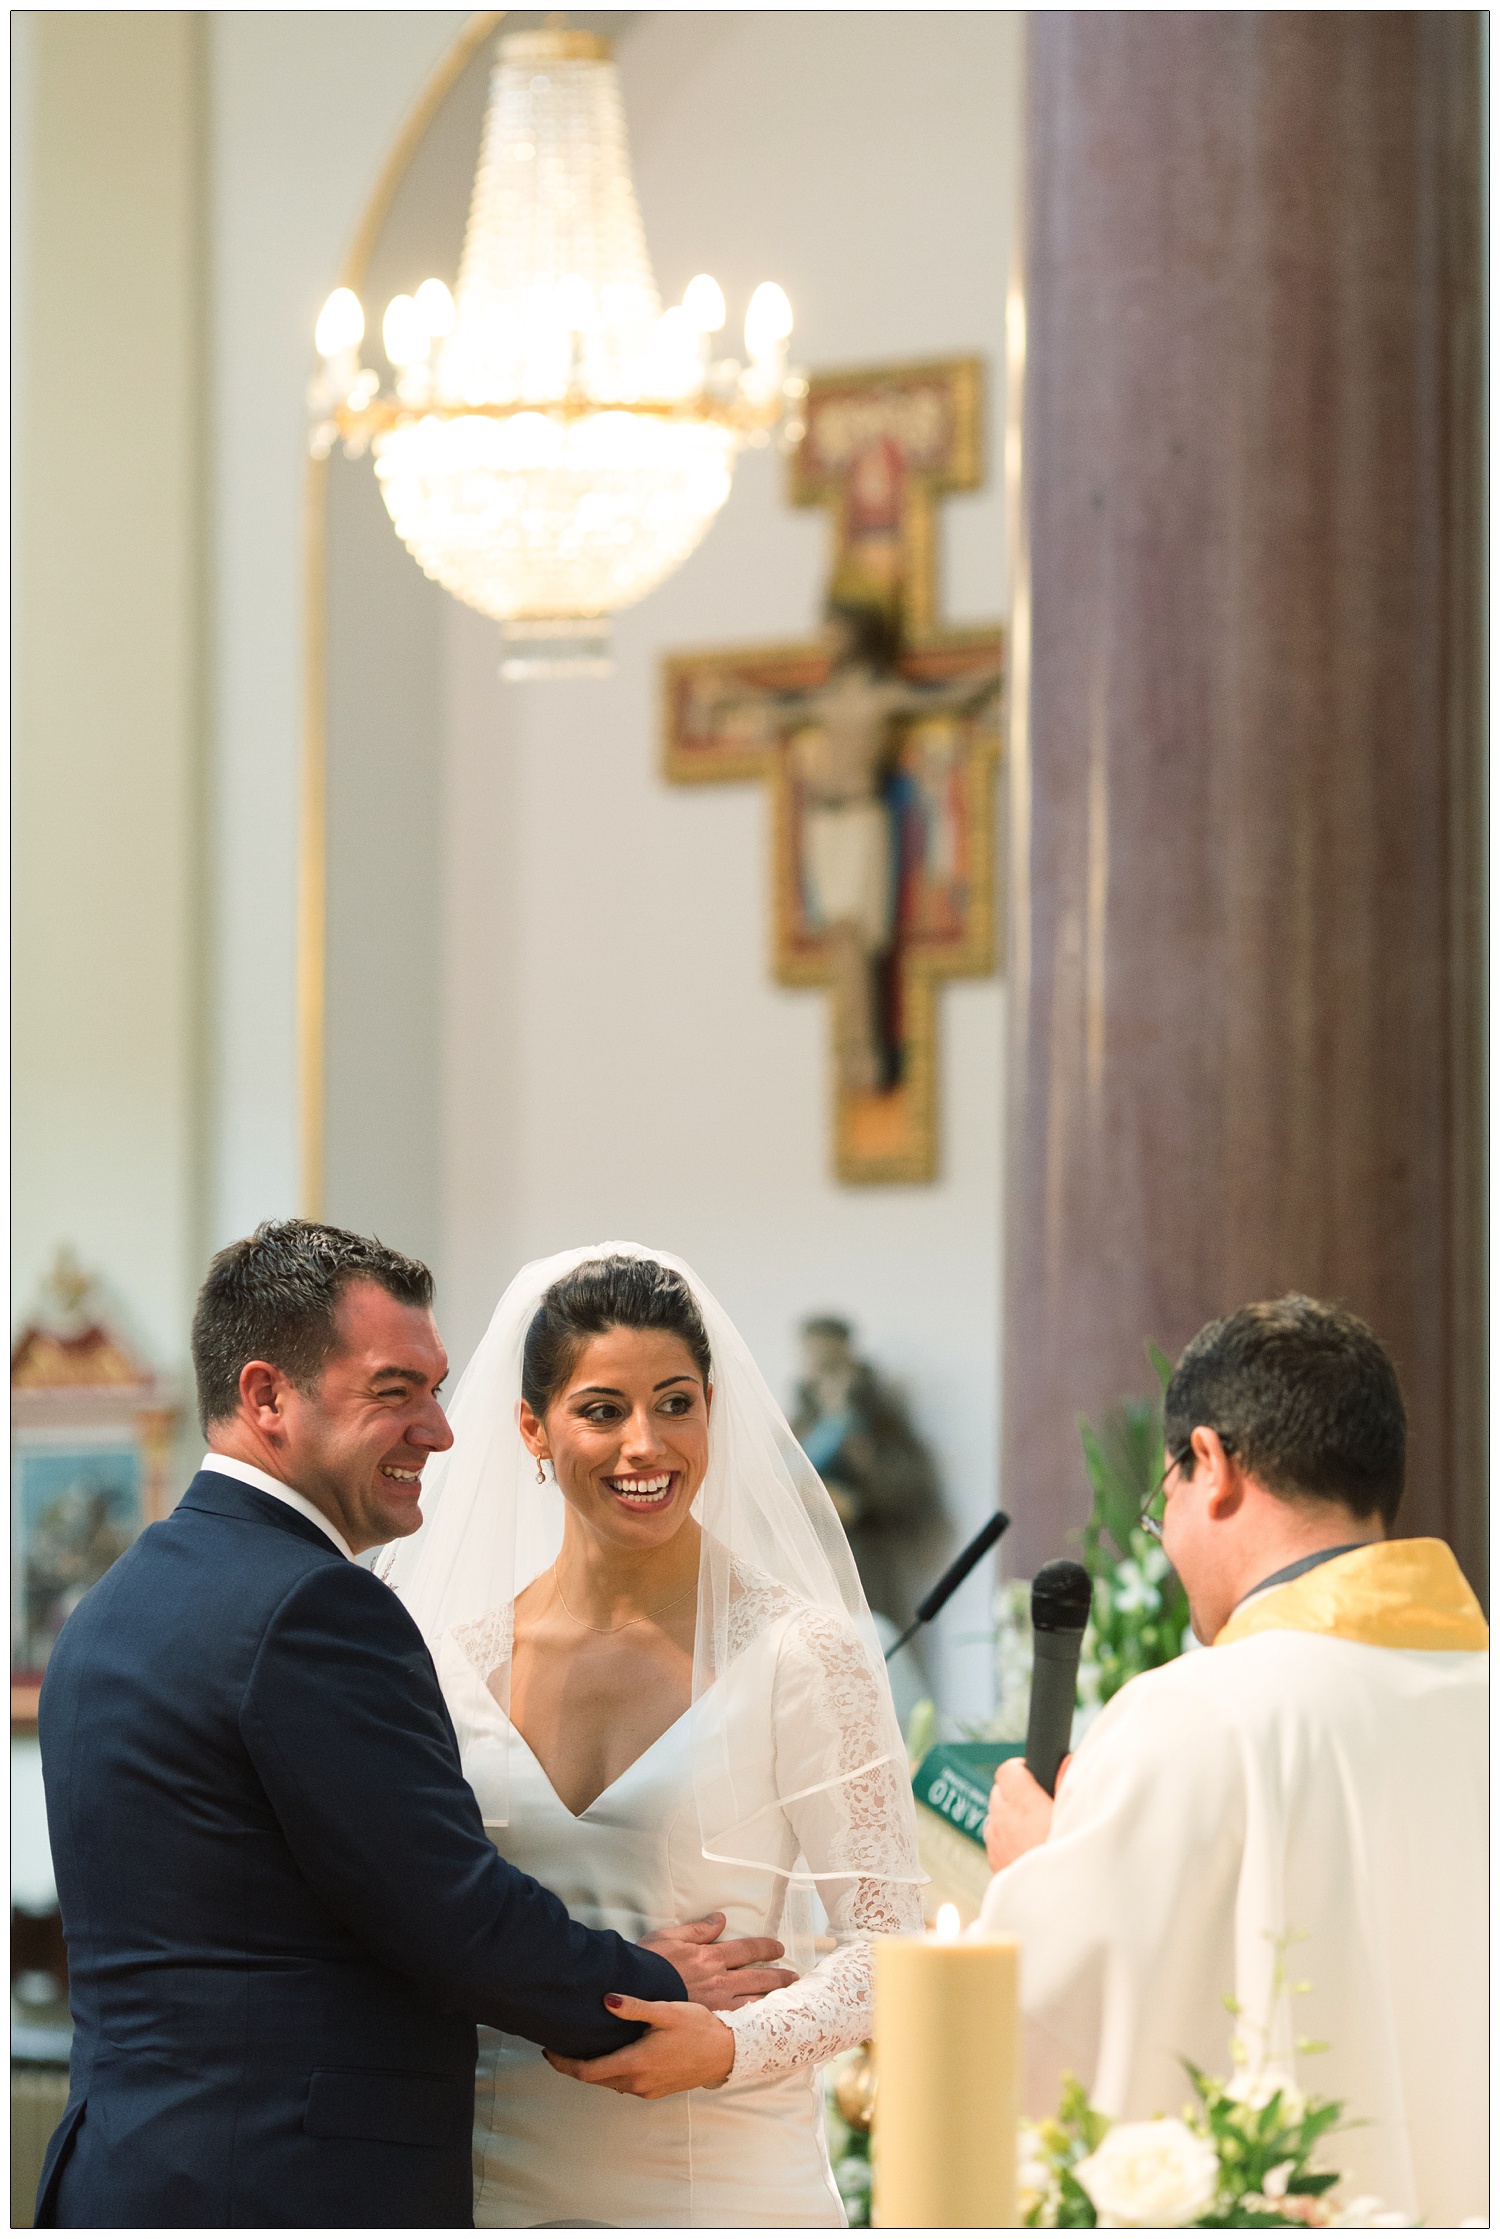 Bride and groom during the wedding ceremony in St. Peter's Italian Church in Clerkenwell. They are both smiling.